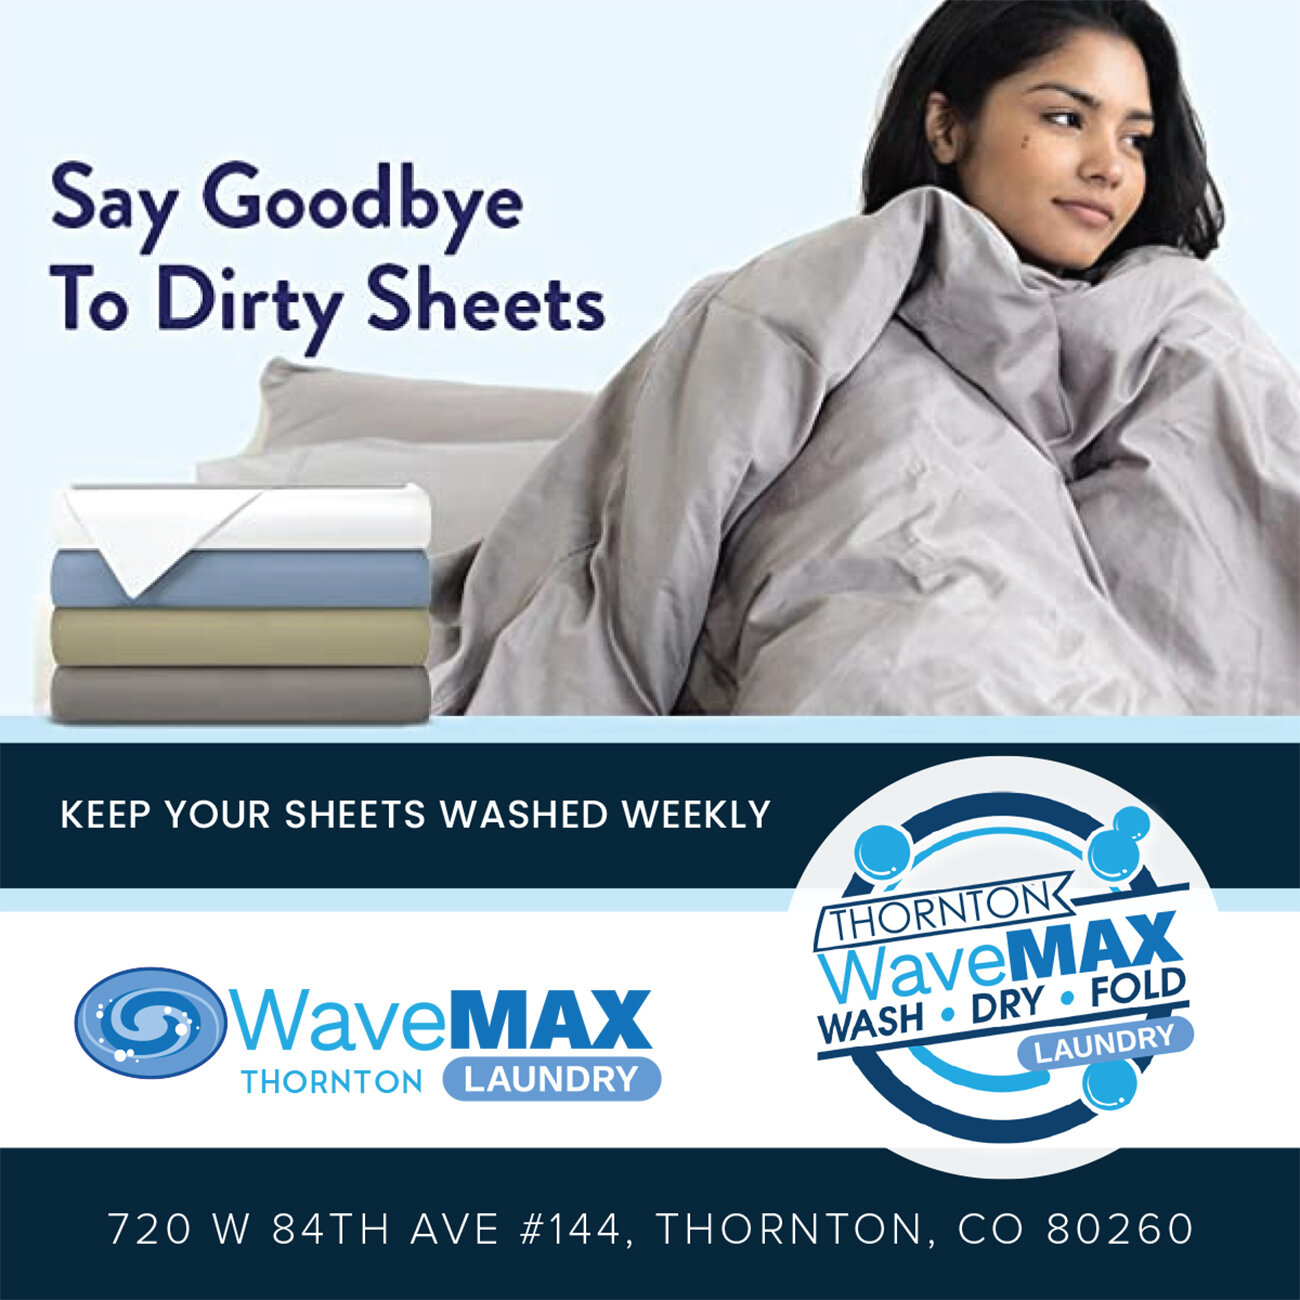 Is your bed as clean as you think it is? Your health depends on your sleep habits. We can help protect your sheets. We infuse Ozone into every rinse. Commonly referred to as Nature&rsquo;s Disinfectant, Ozone sanitizes your laundry and leaves it soft